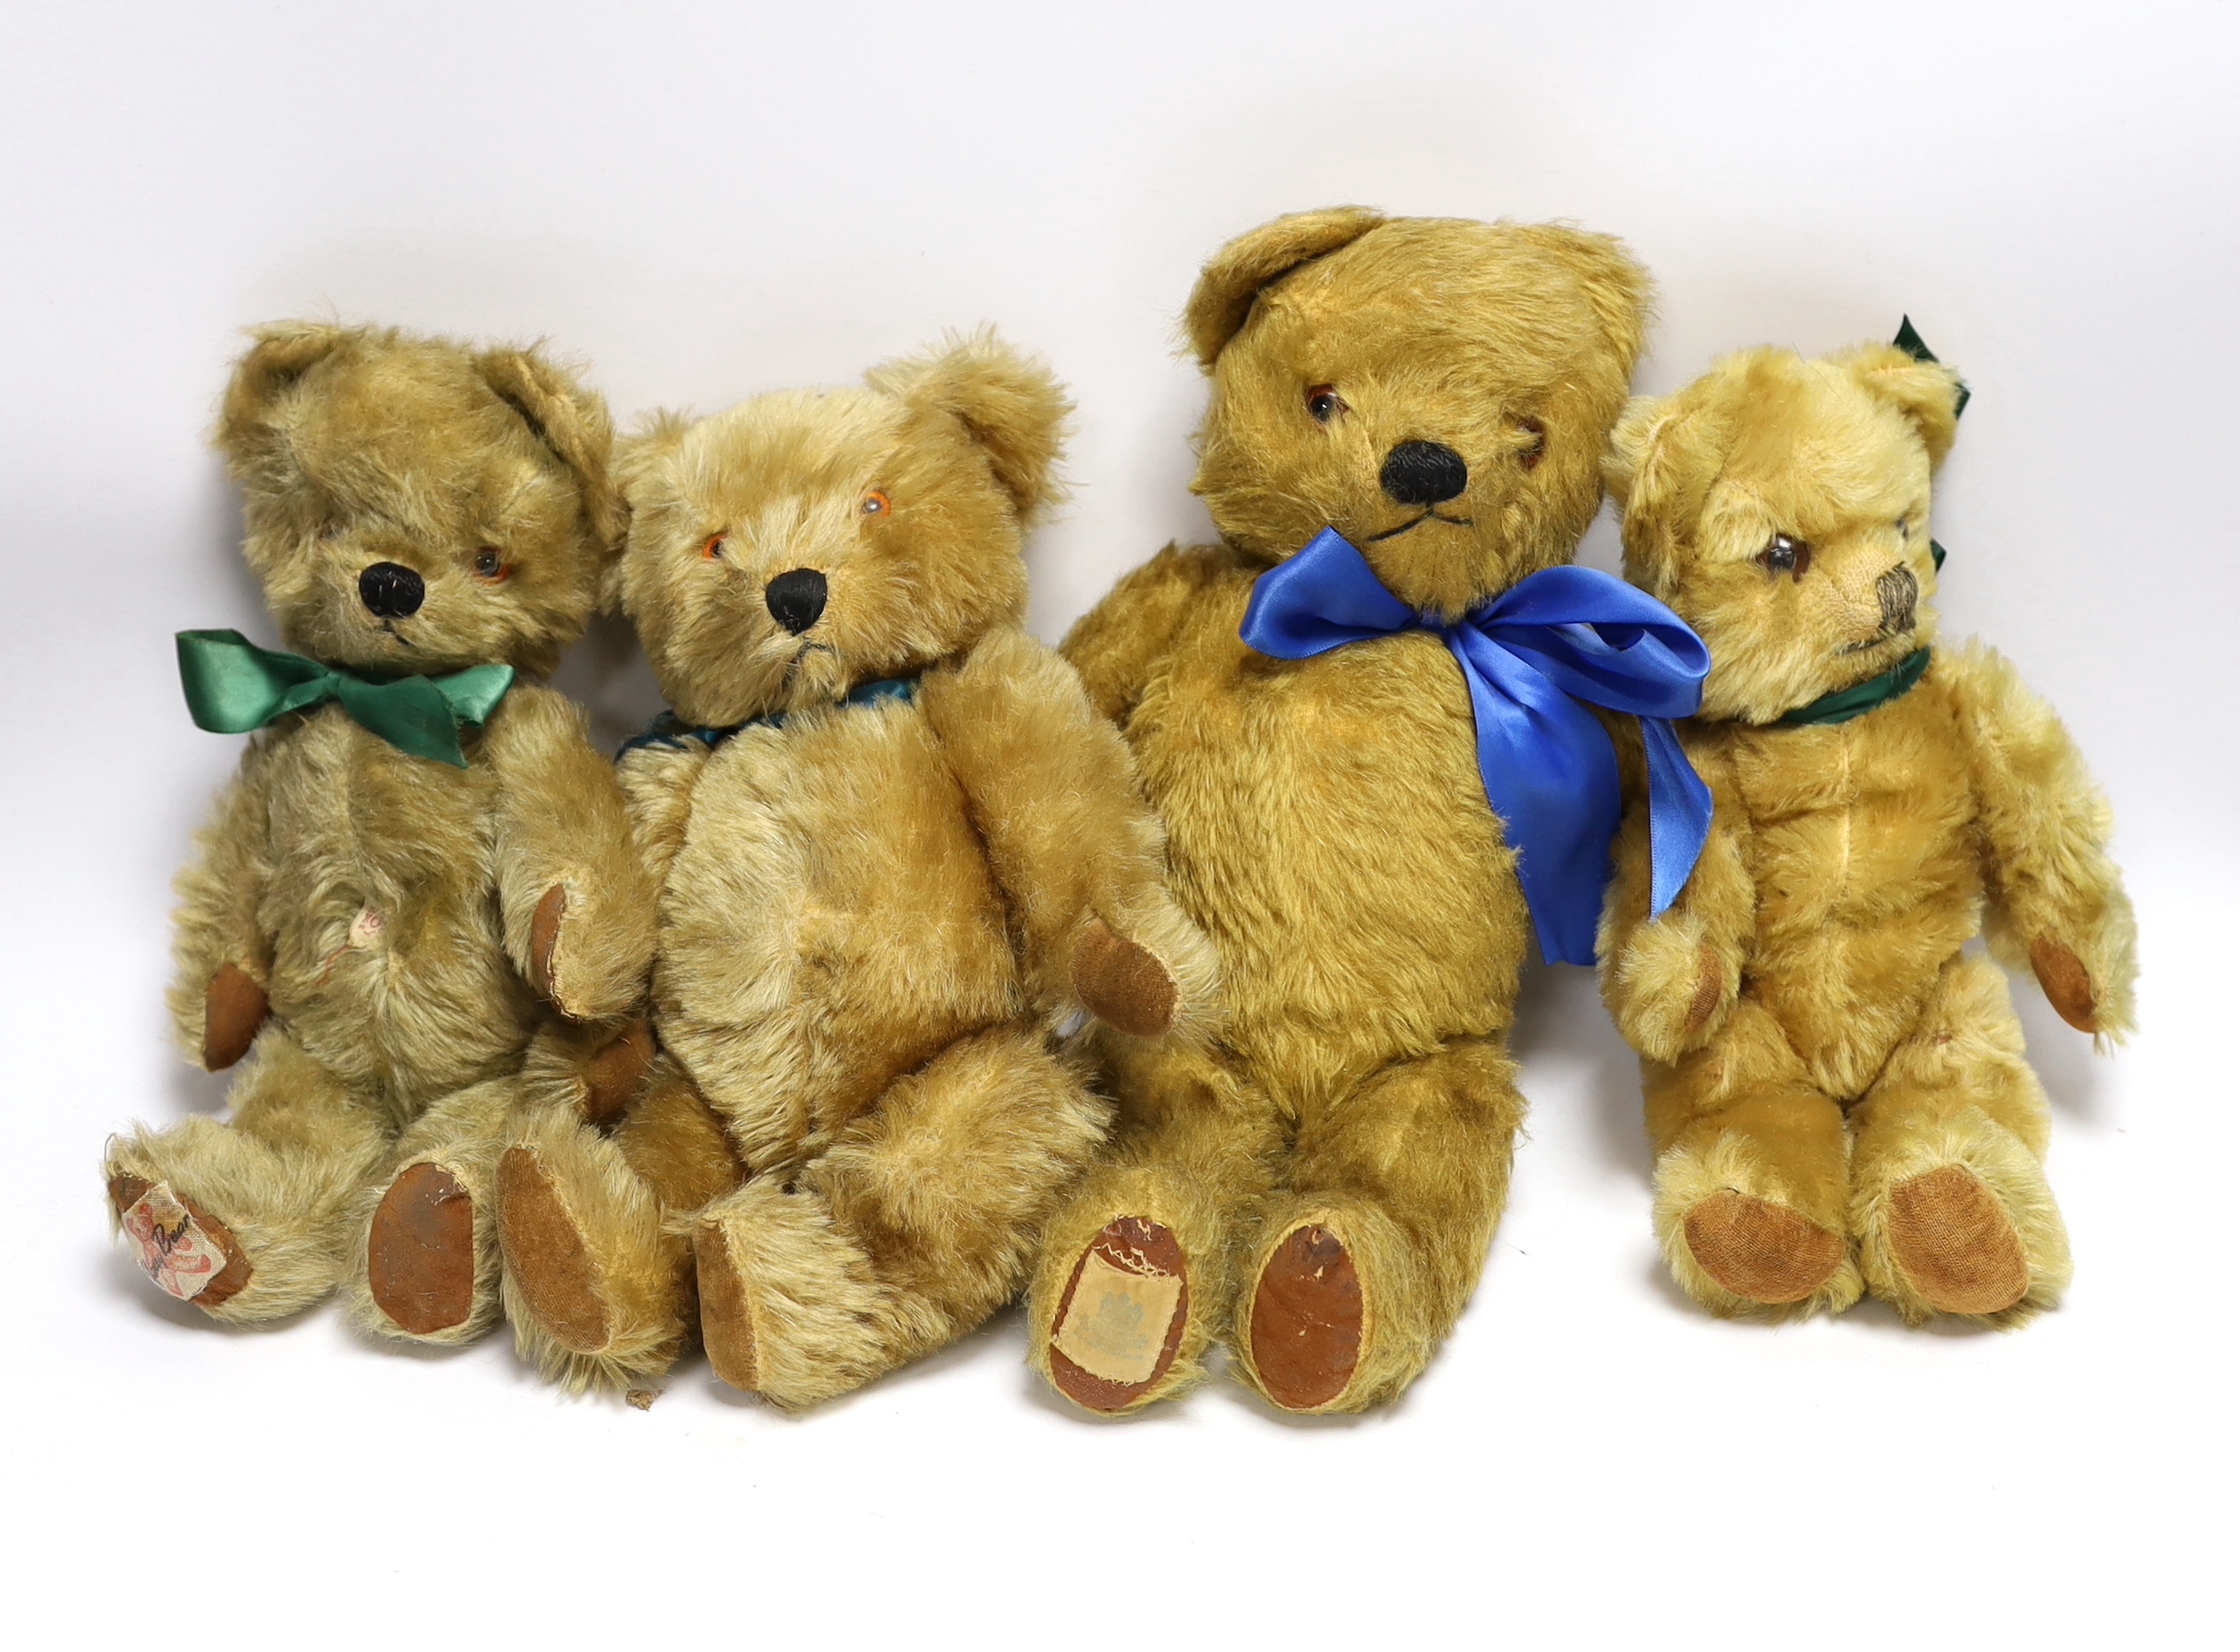 A 1950's Chiltern, excellent condition, a 1950's Chad Valley, excellent condition, a 1950's Chad Valley with label, and a 1950's bear, good condition (4)